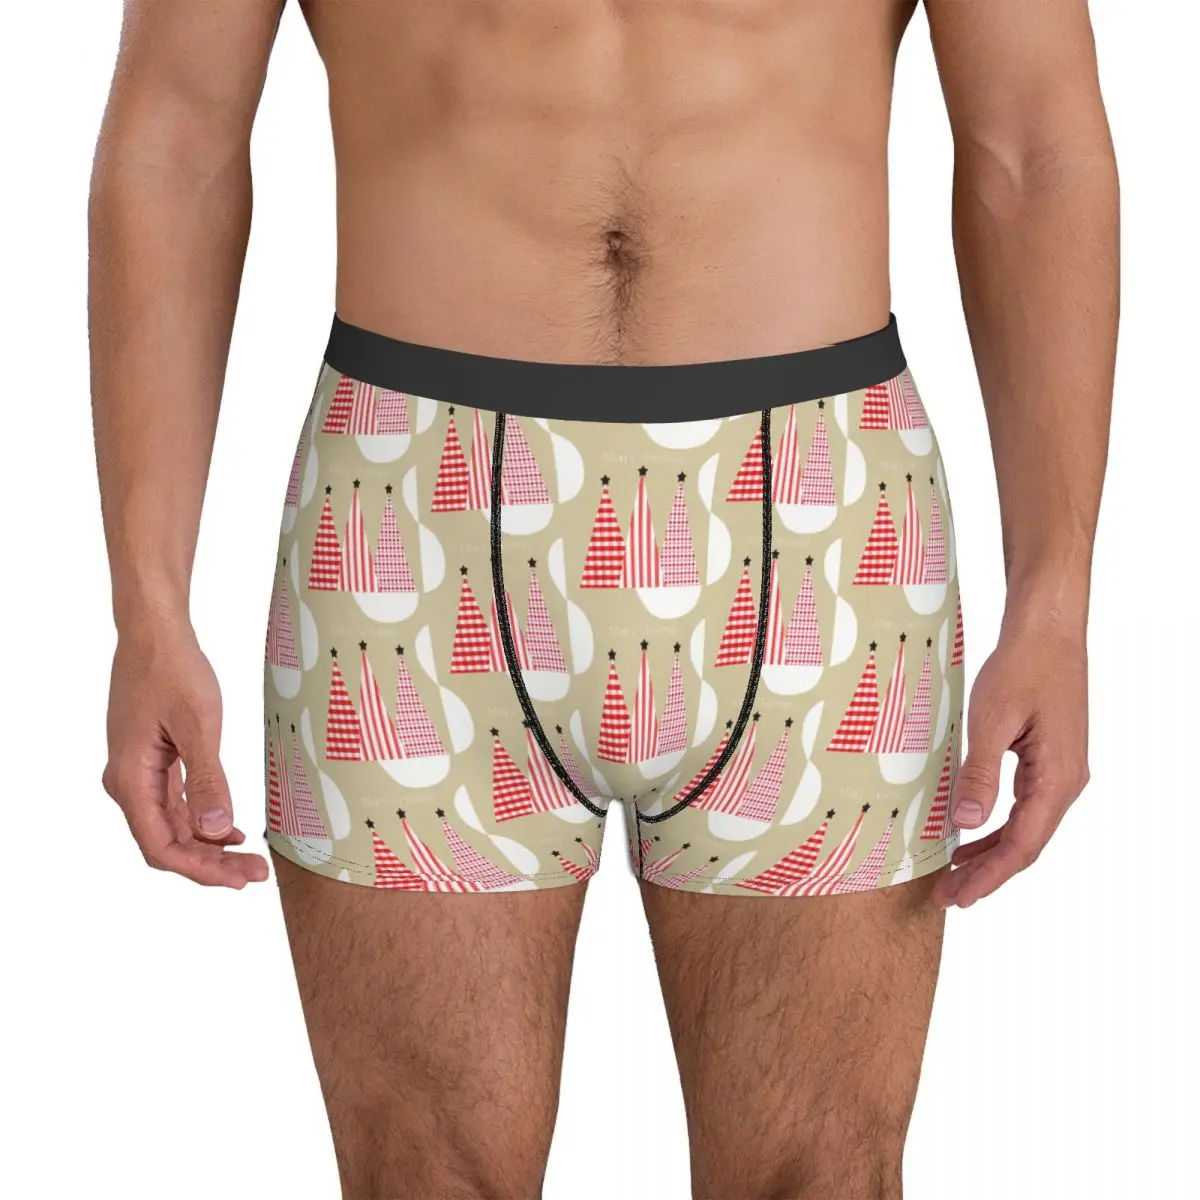 Merry Christmas Underwear Red And White Trees Pouch High Quality Trunk Custom Boxer Brief Sexy Males Underpants Big Size